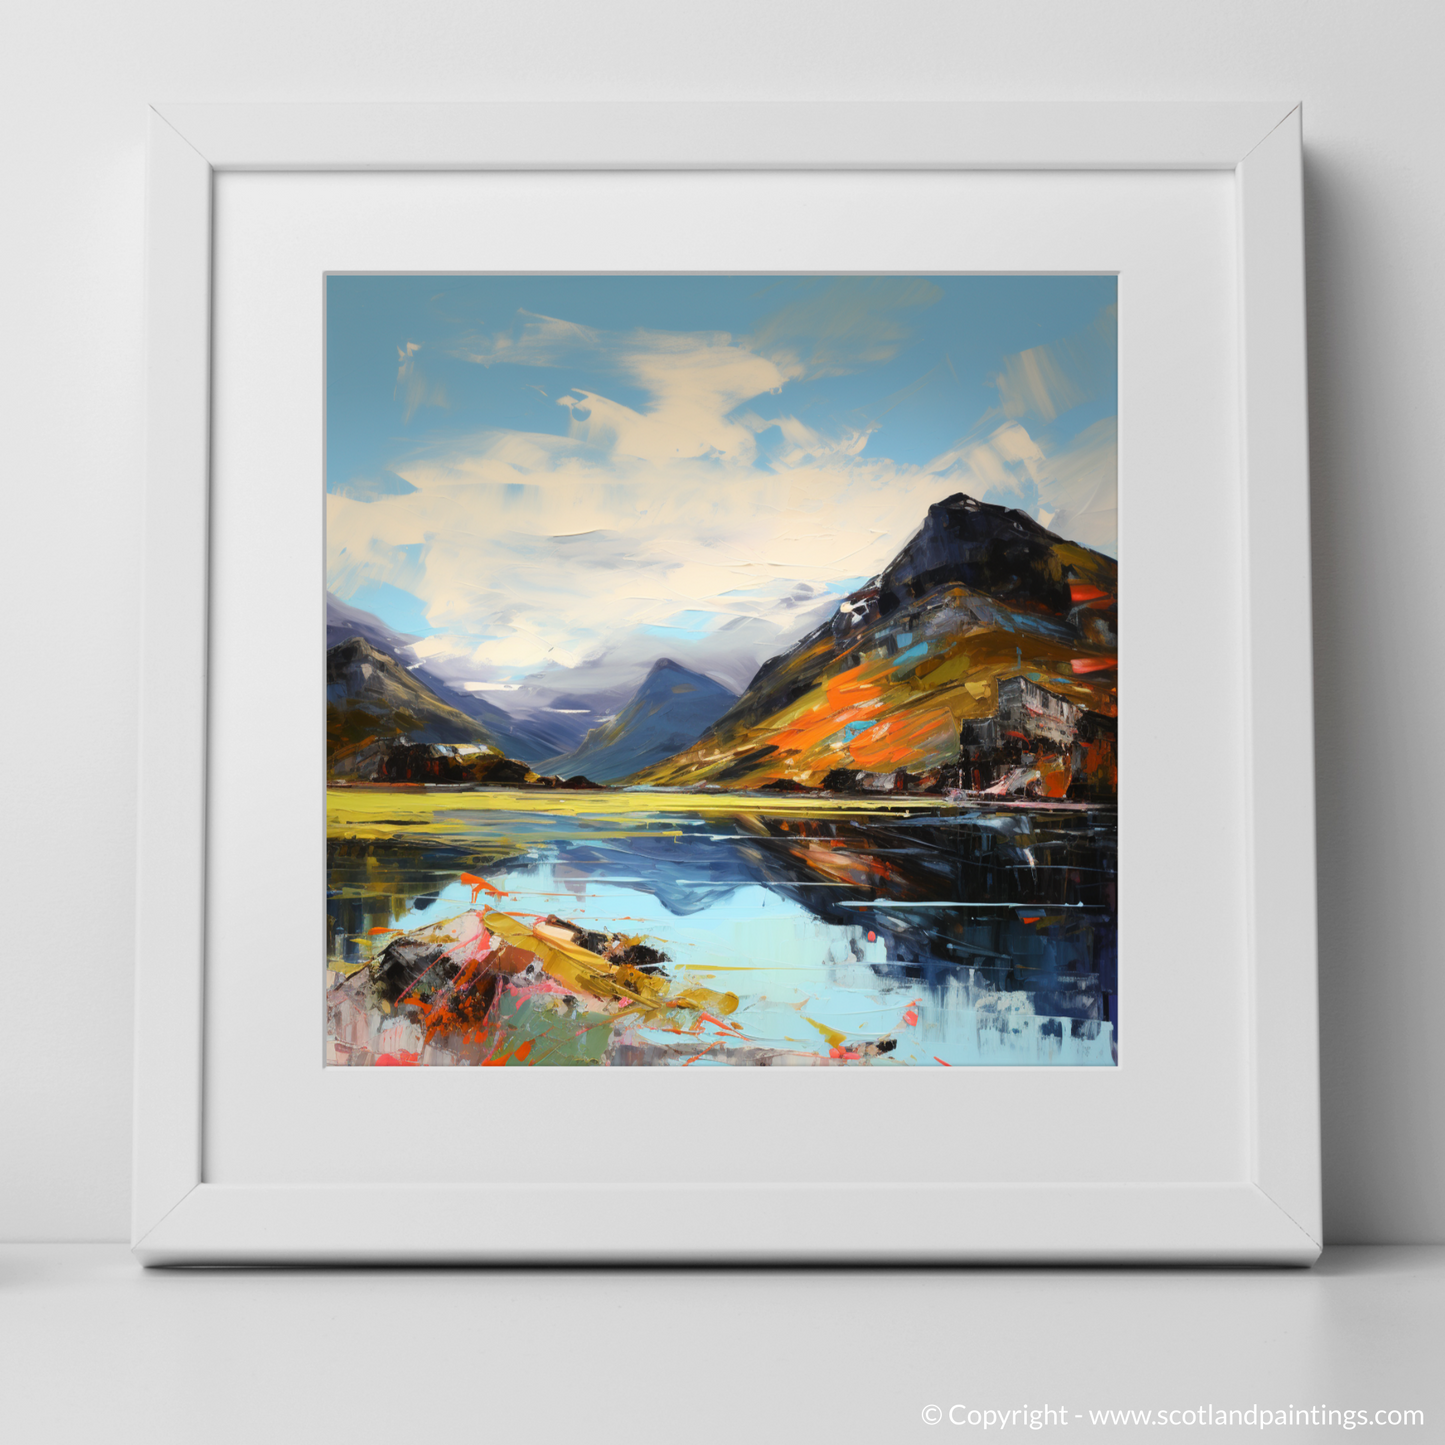 Art Print of Loch Glencoul, Sutherland with a white frame